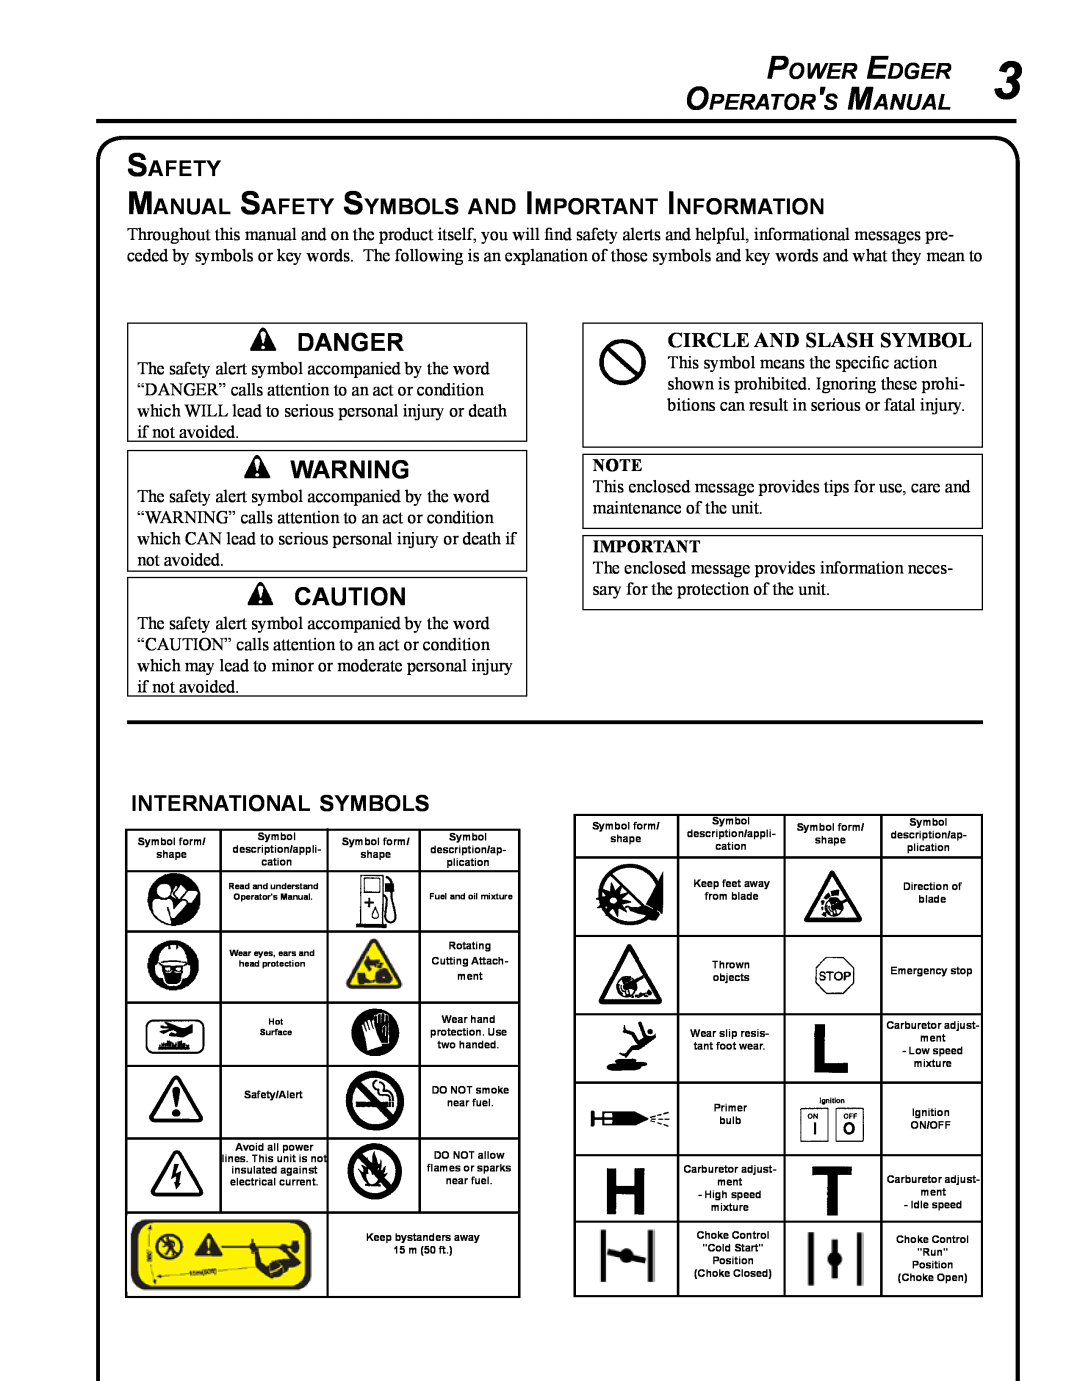 Echo PE-225 manual Danger, Power Edger, Operators Manual, Safety Manual Safety Symbols and Important Information 